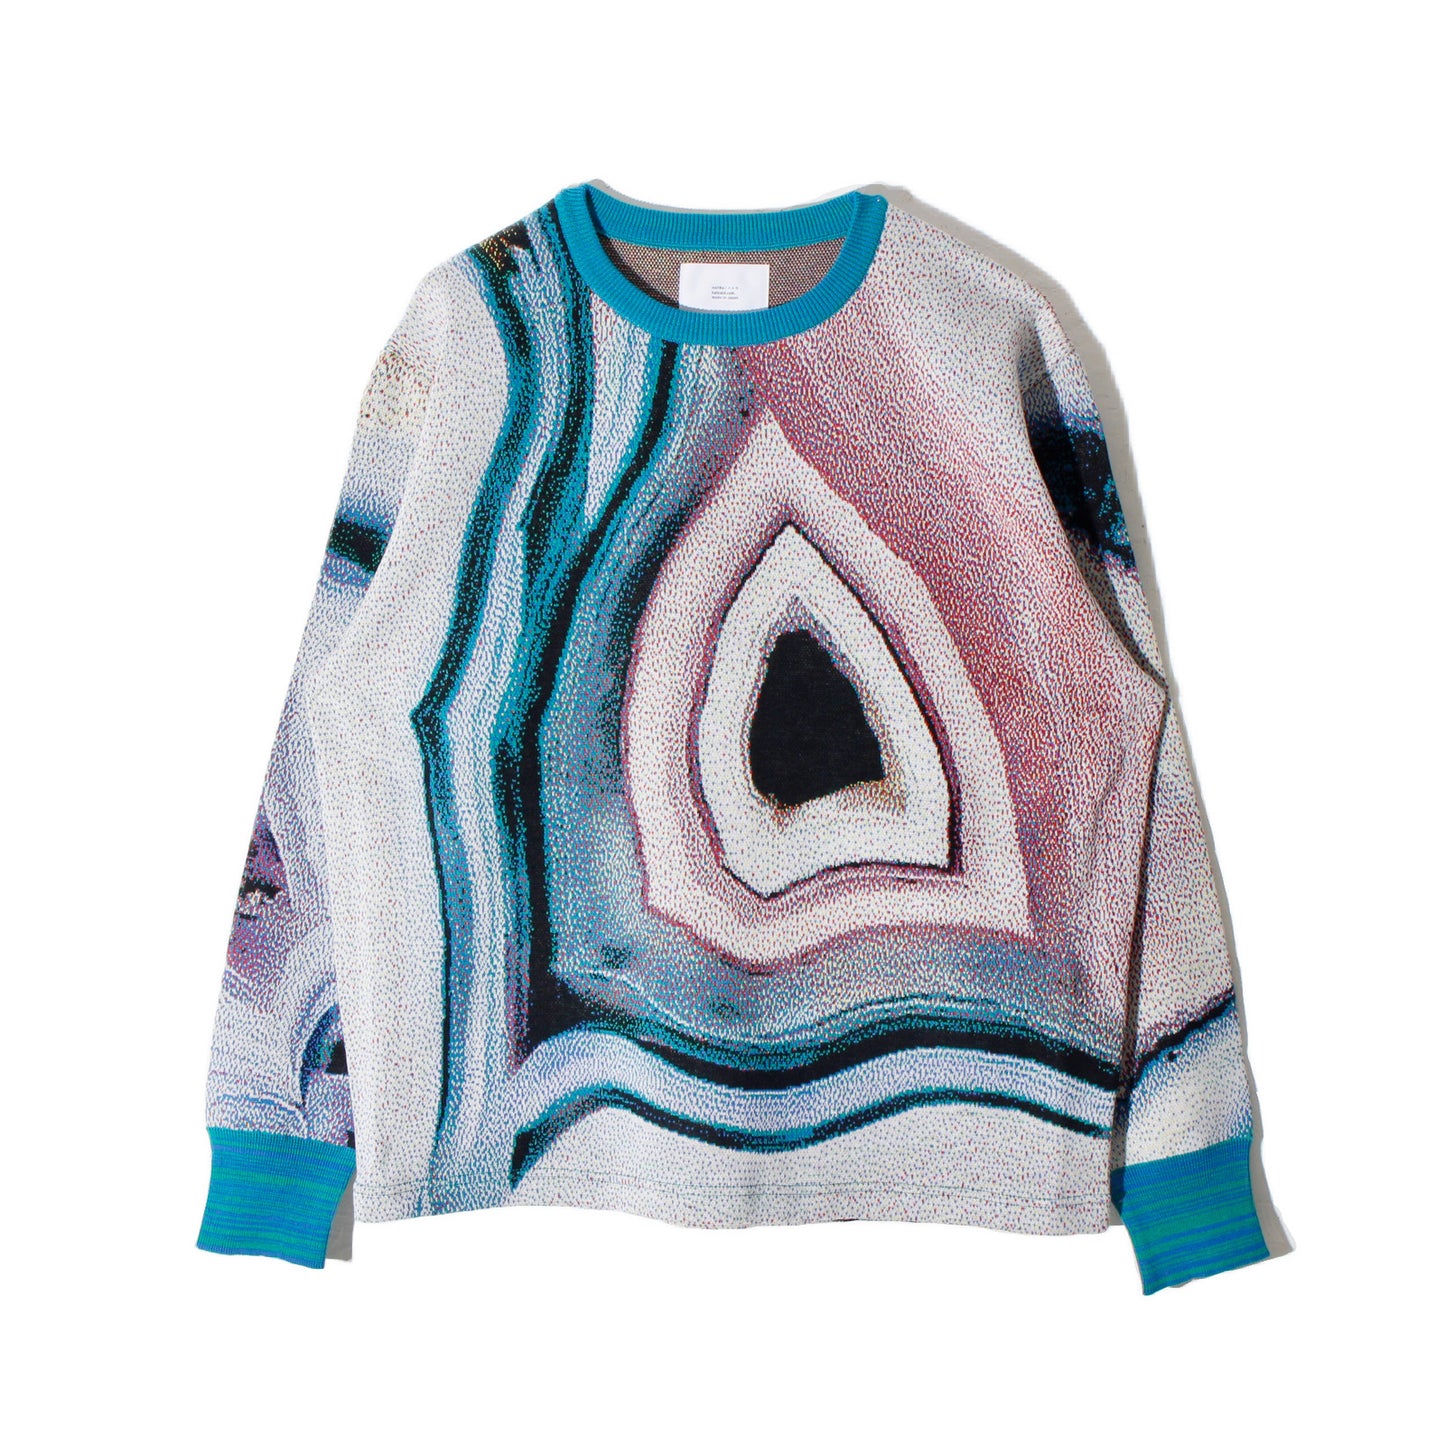 Mineral_knit_sweater / HAL